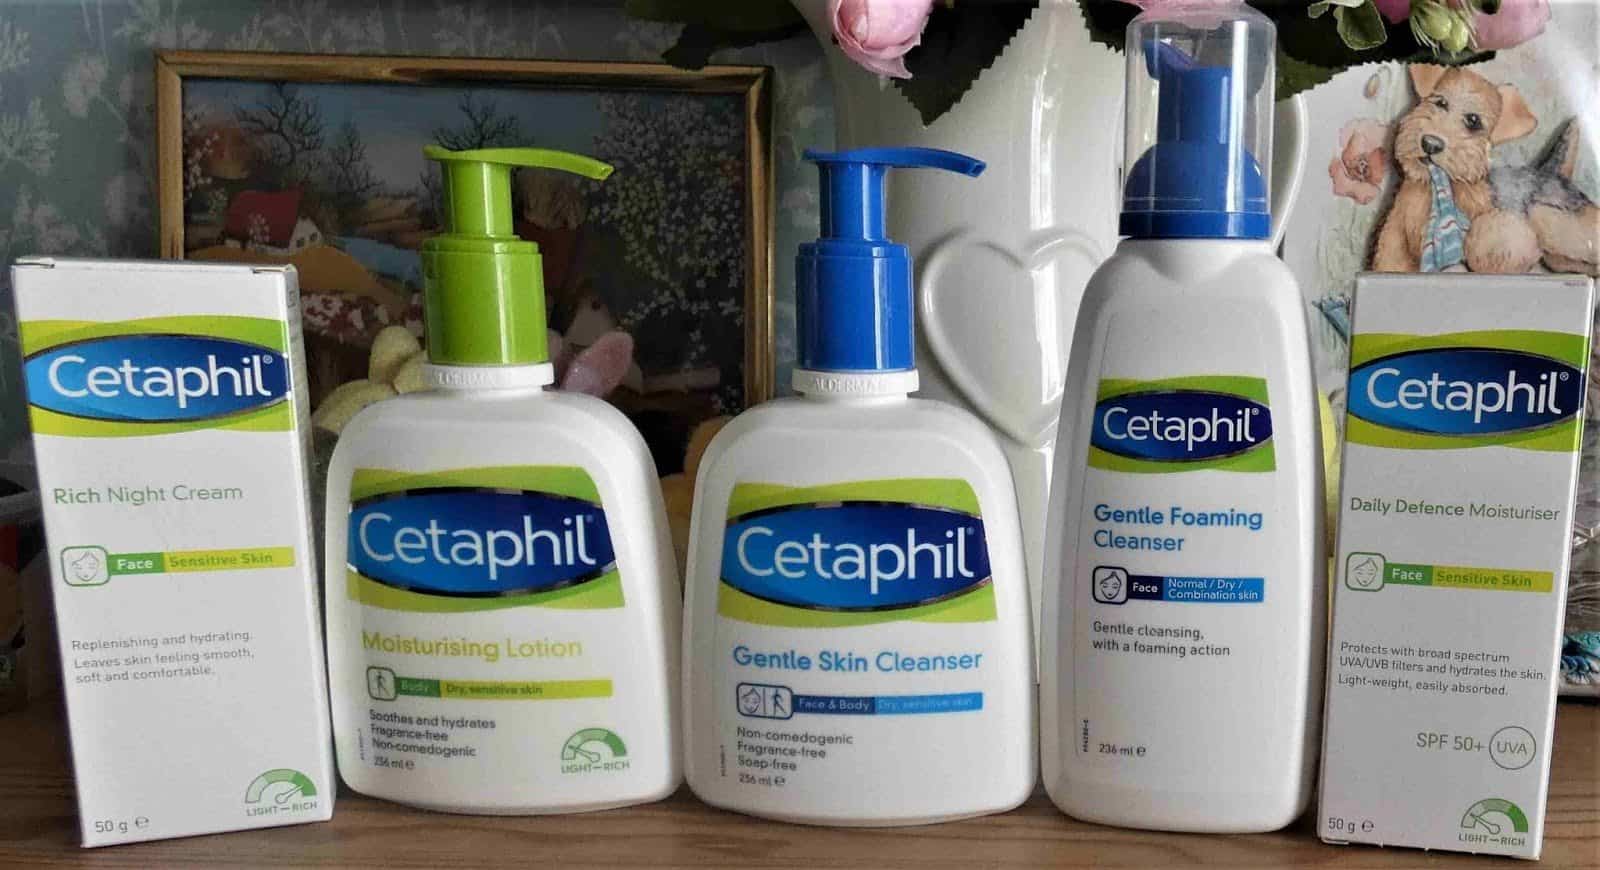 Is Cetaphil Good for Acne?